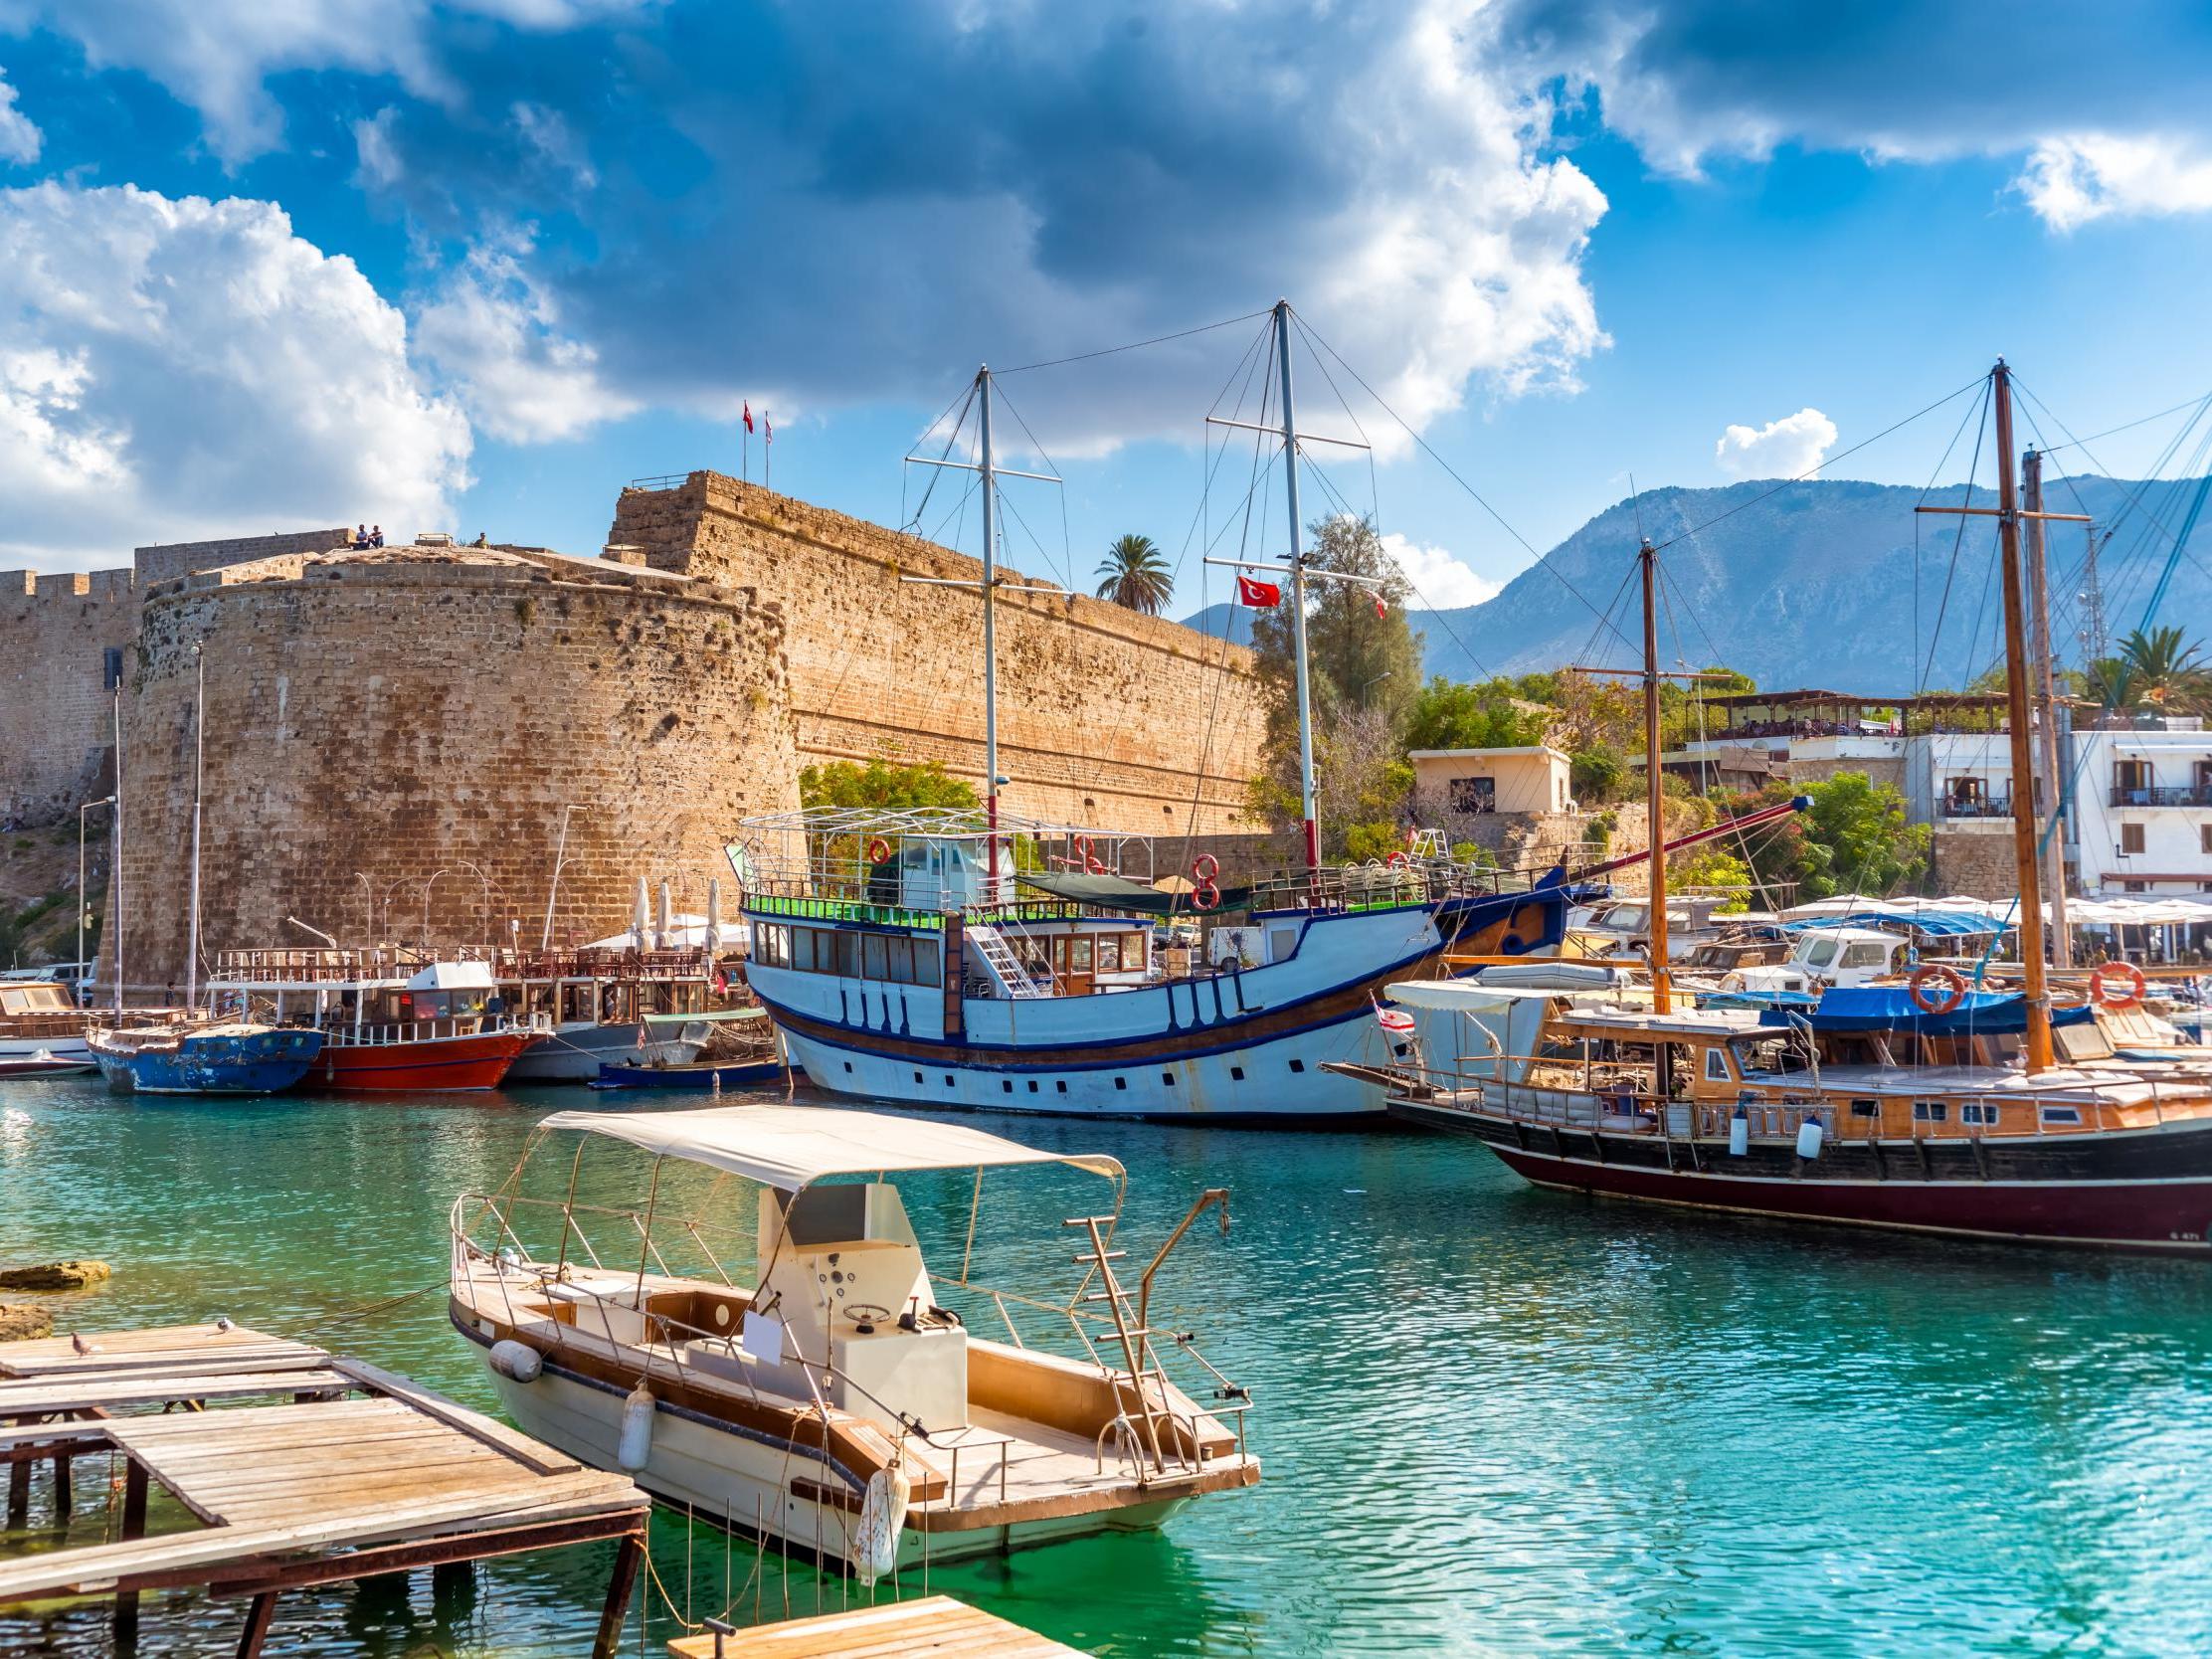 The harbour town of Kyrenia, Northern Cyprus